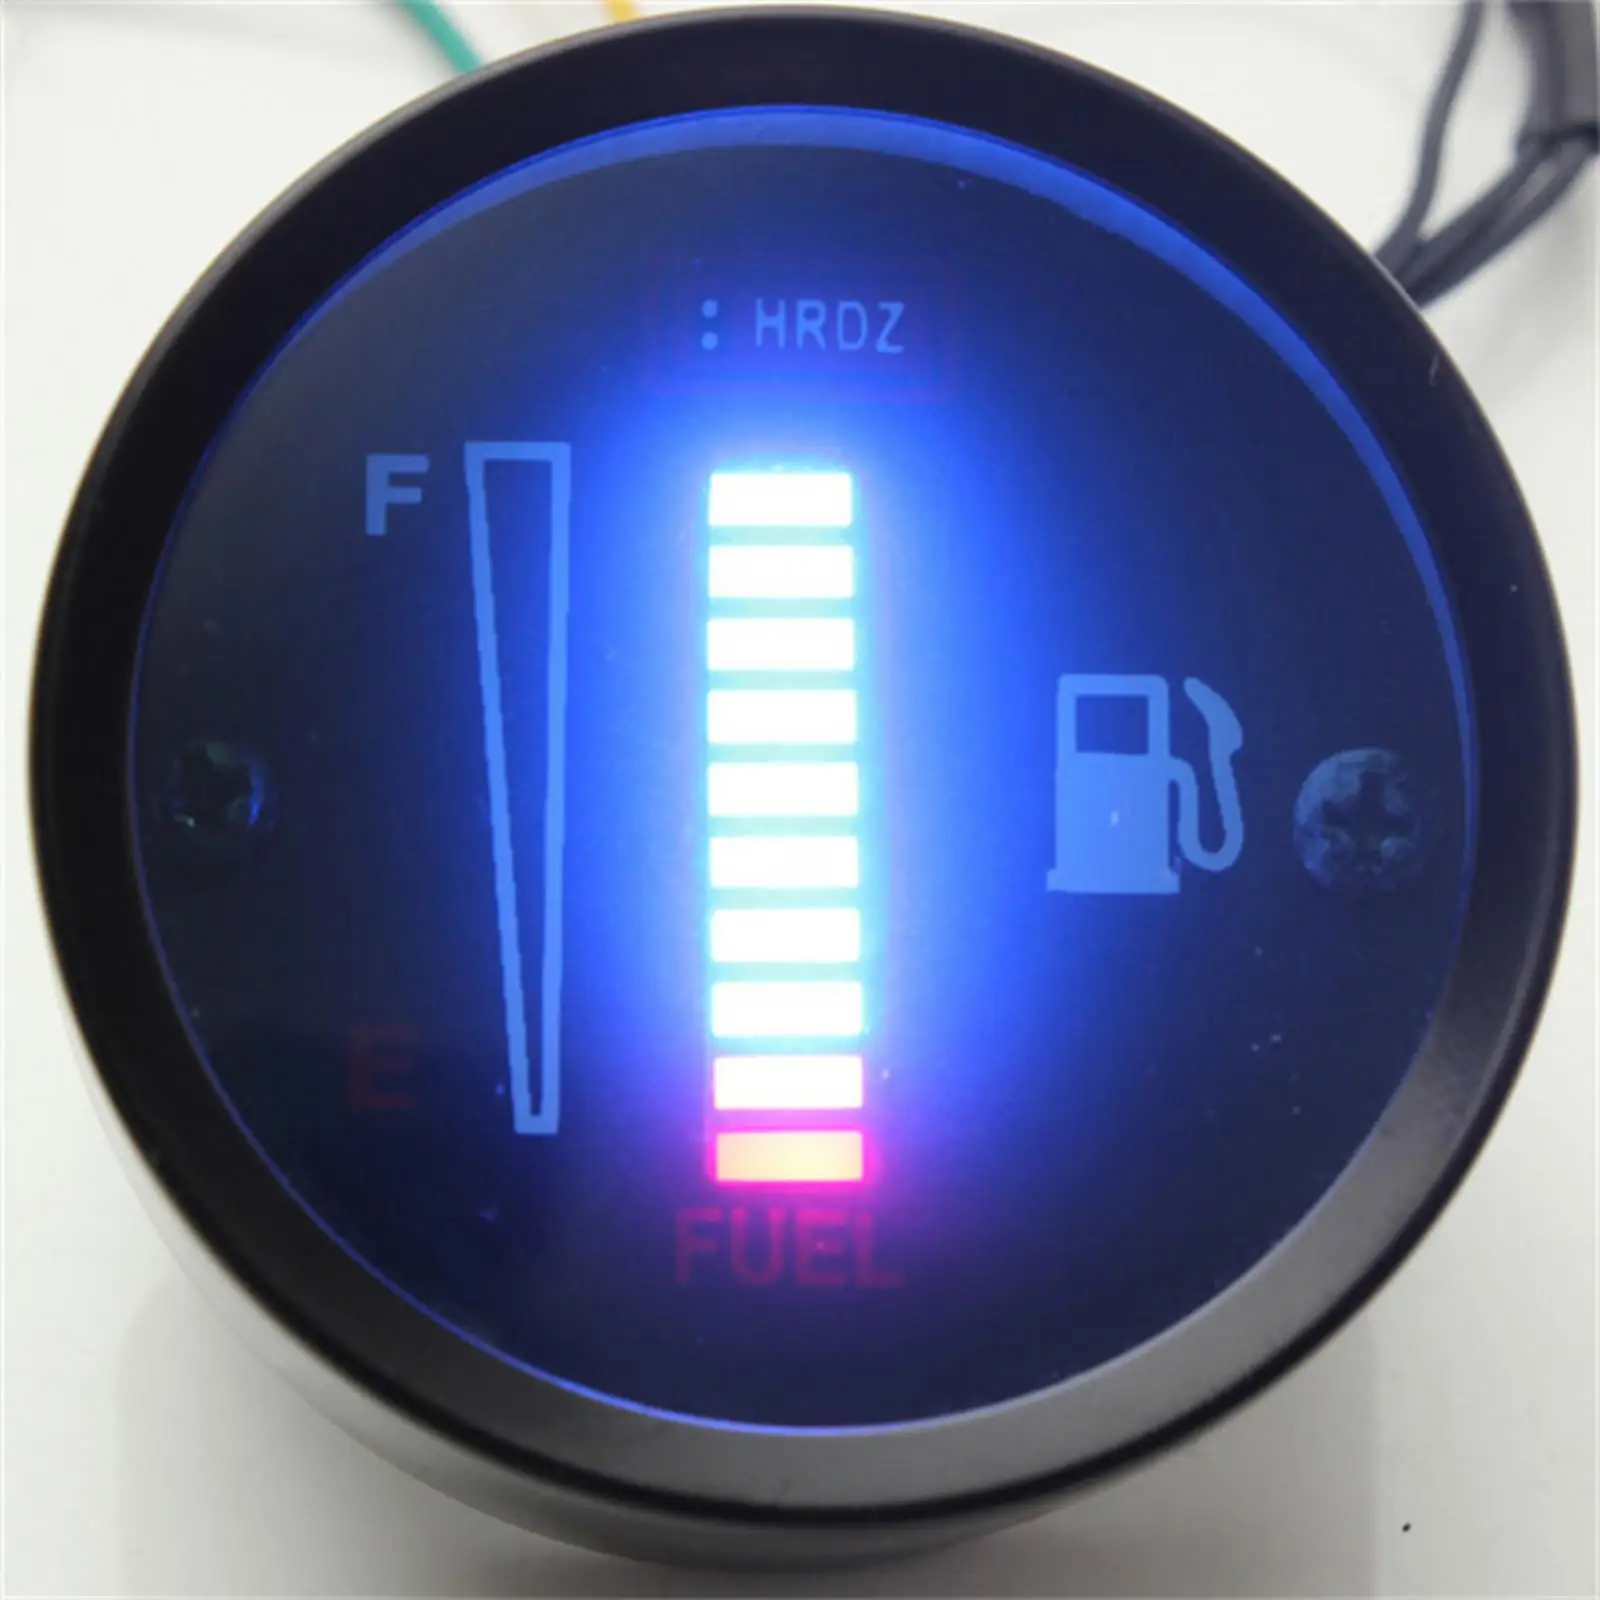 Car Motorcycle Fuel Level Meter Gauge Large Screen Fuel Tank Gauge Vehicles 1 Red LED Replacement Universal 8 Blue LED Display